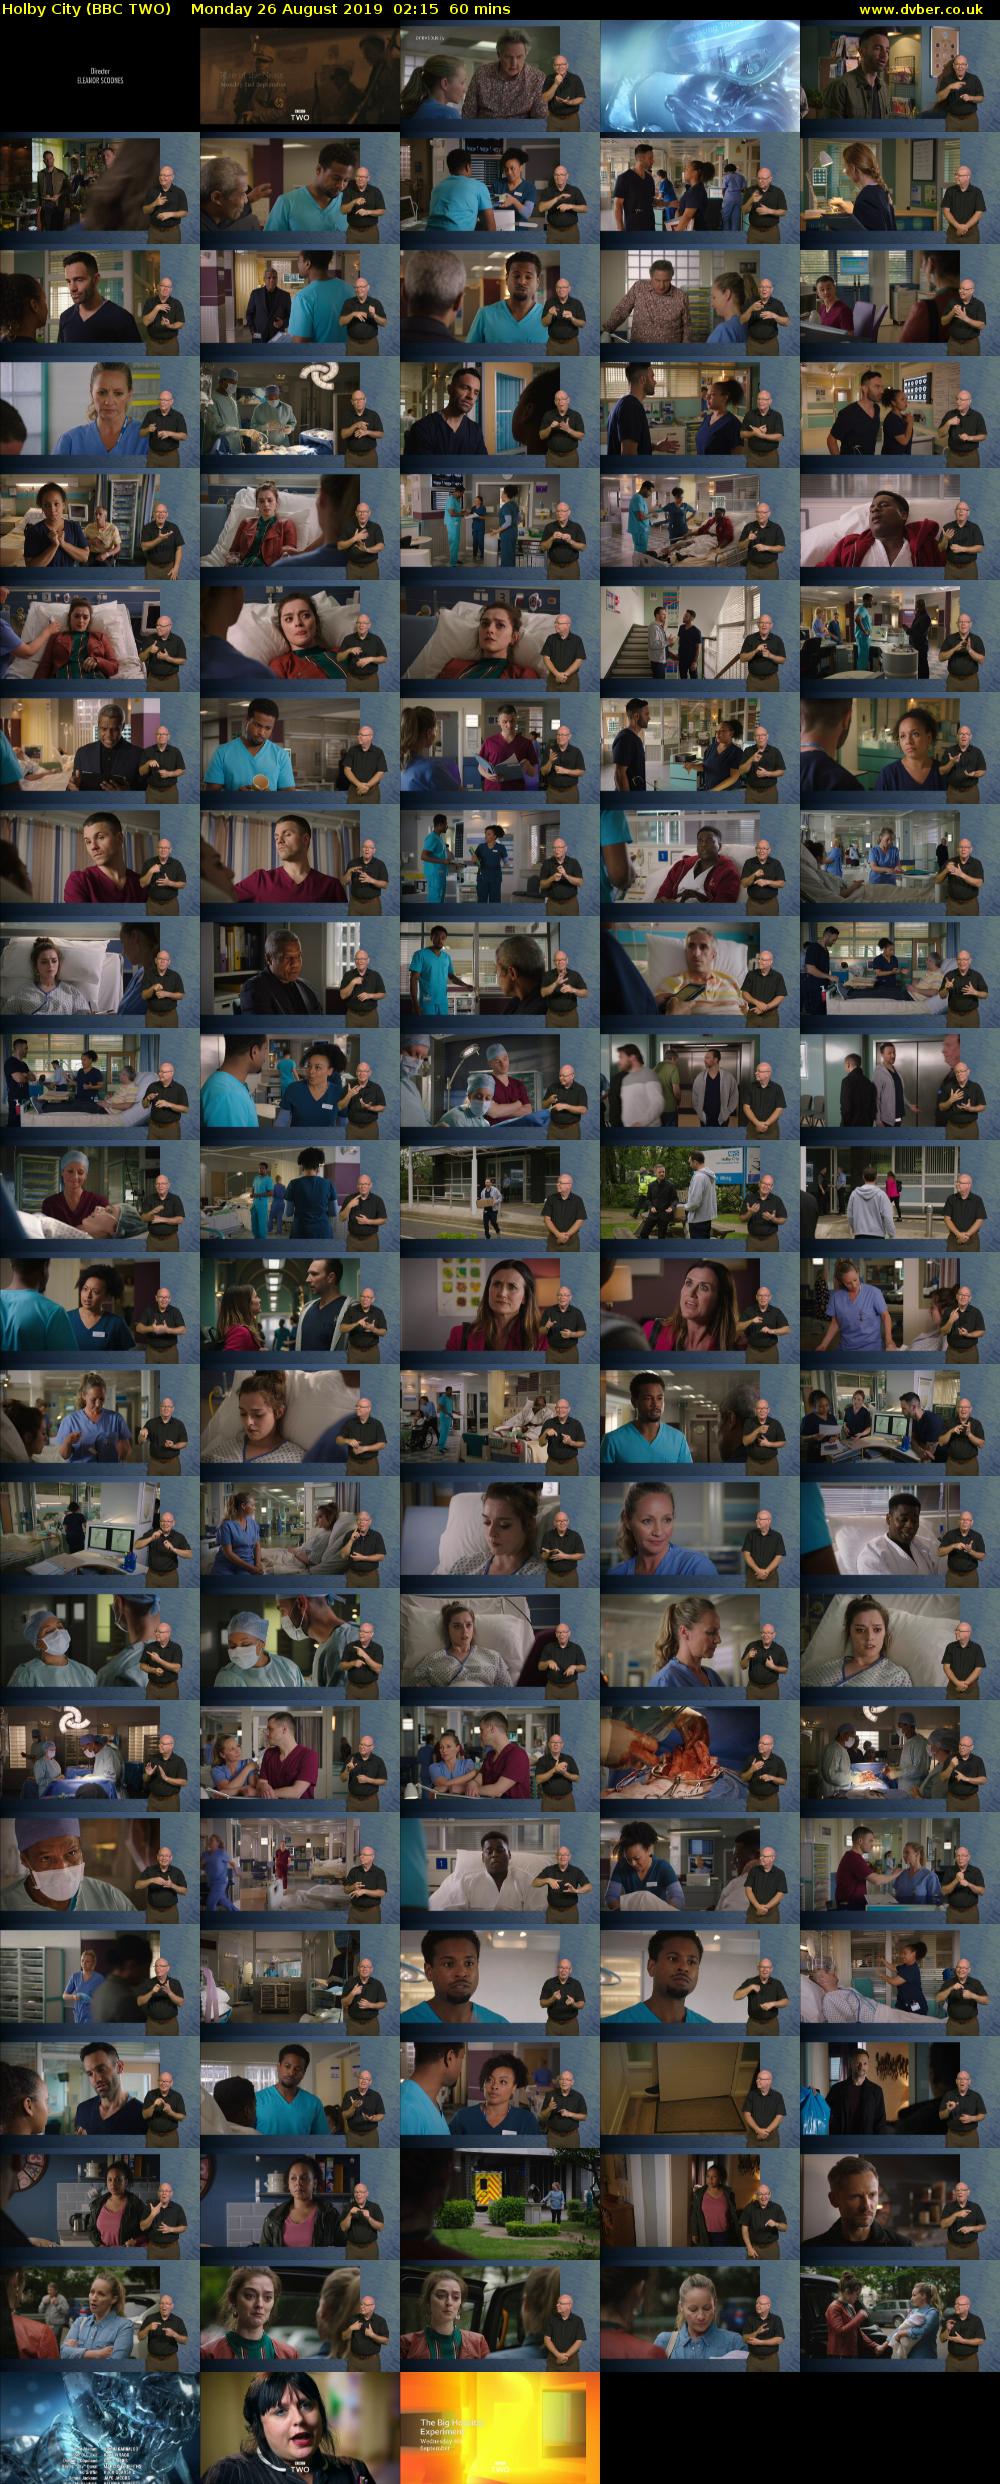 Holby City (BBC TWO) Monday 26 August 2019 02:15 - 03:15